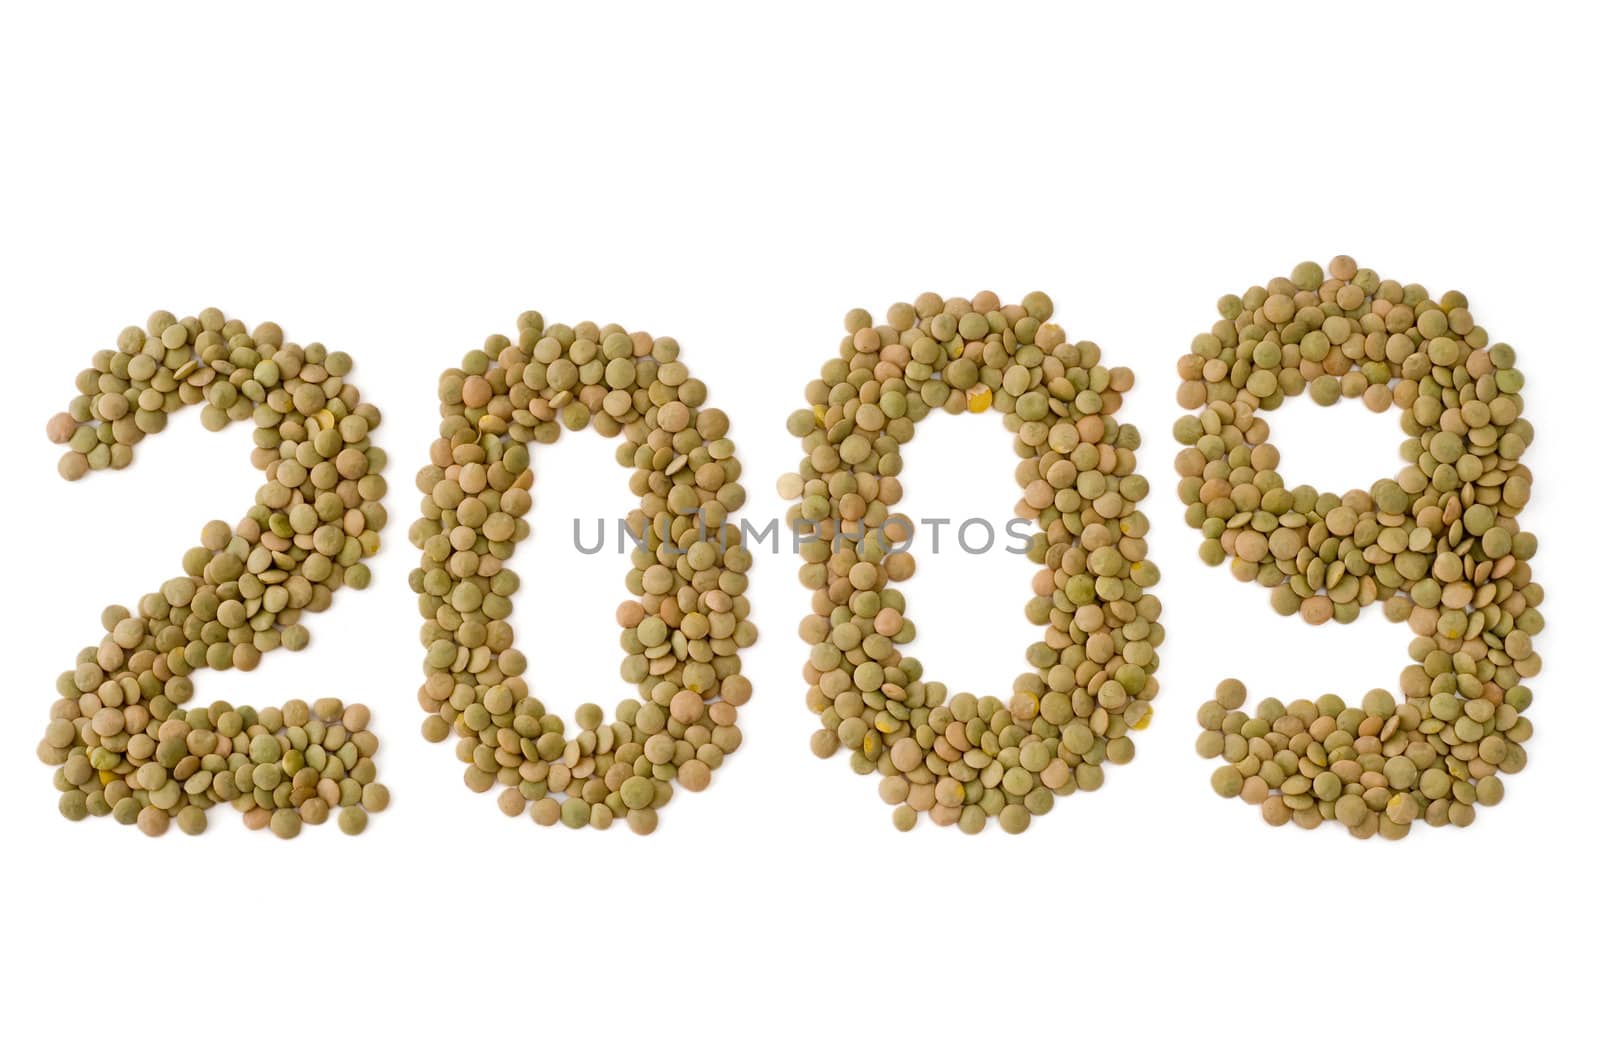 2009 sign made of lentils, isolated on white background